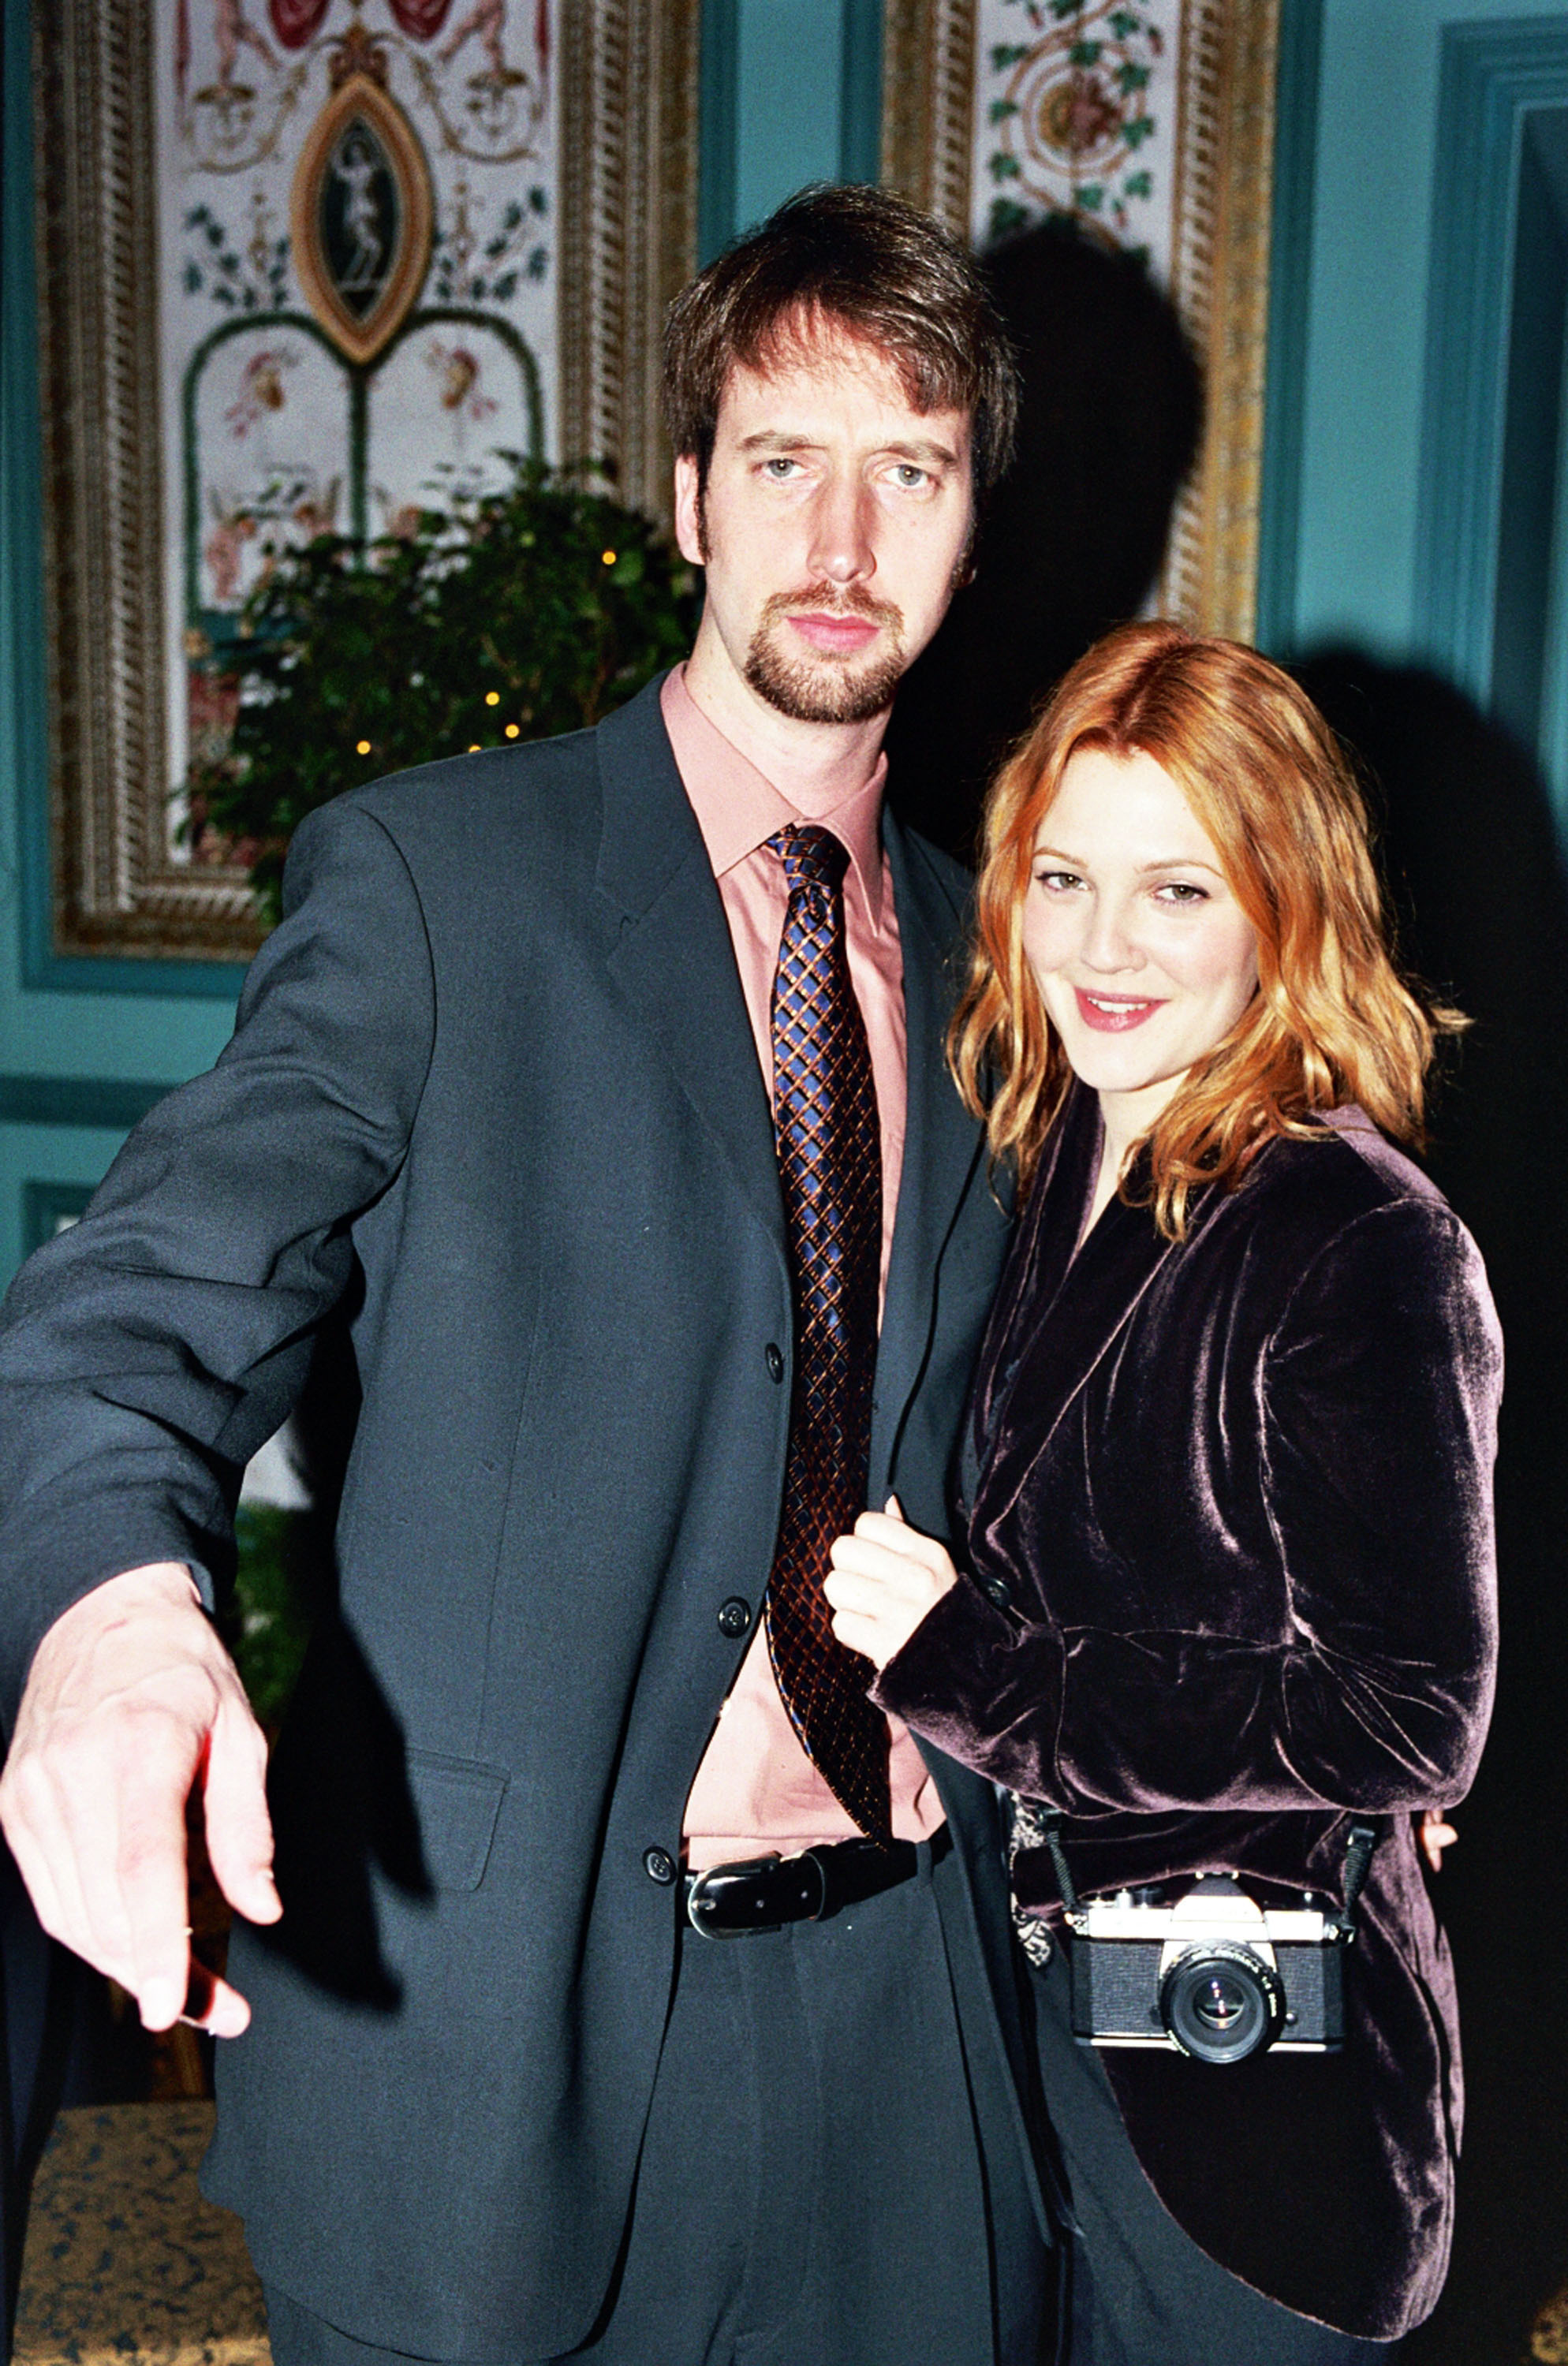 Tom Green and Drew Barrymore at Paris Hotel in Las Vegas, Nevada in 2000 | Source: Getty Images